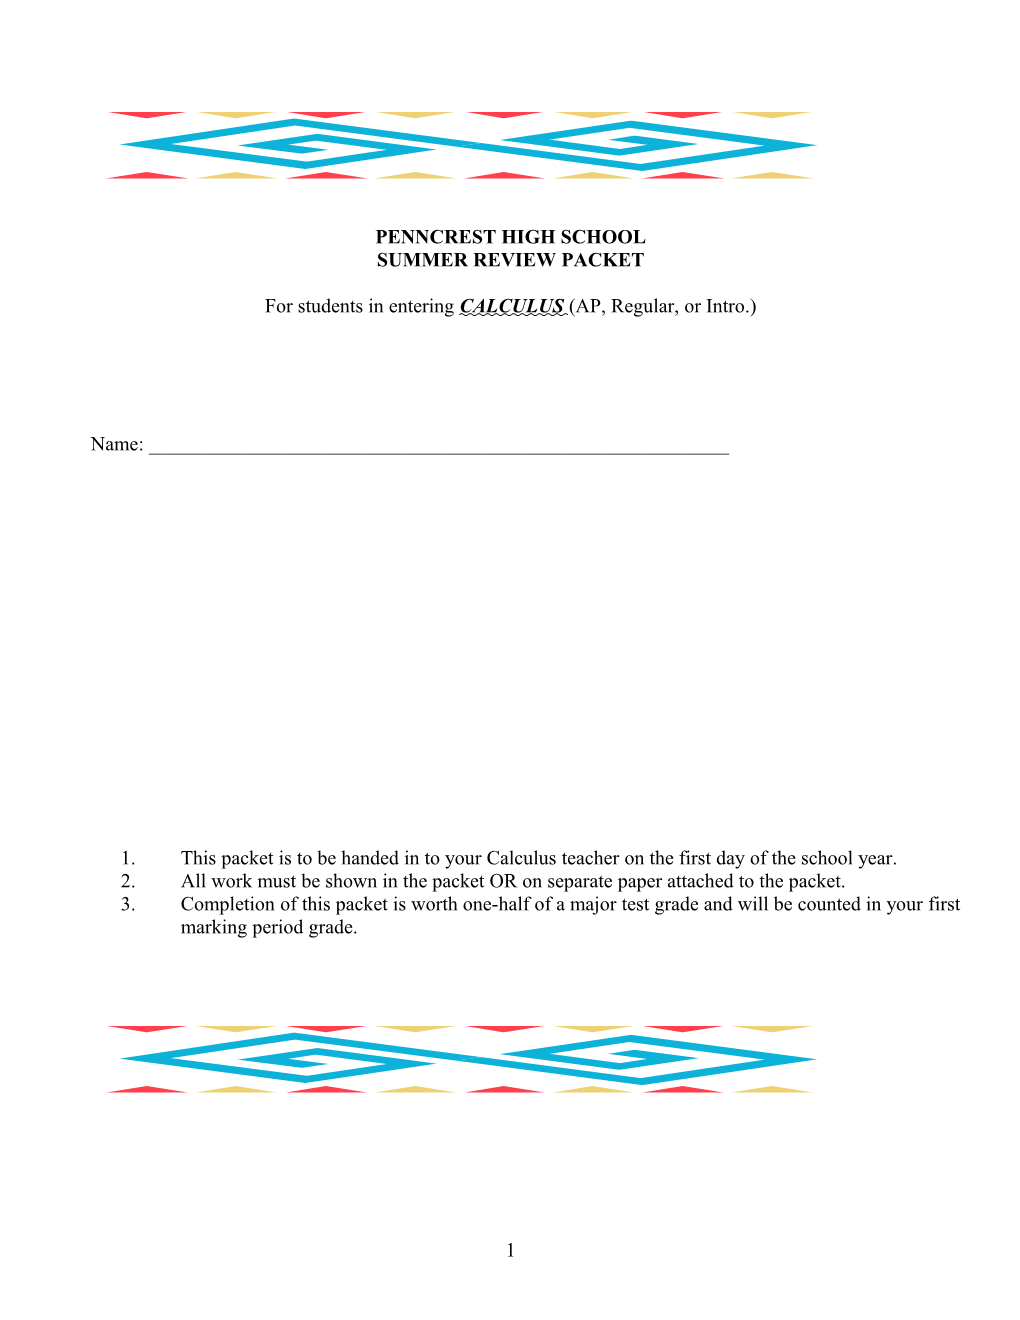 Summer Review Packet for Students Entering Calculus (All Levels)